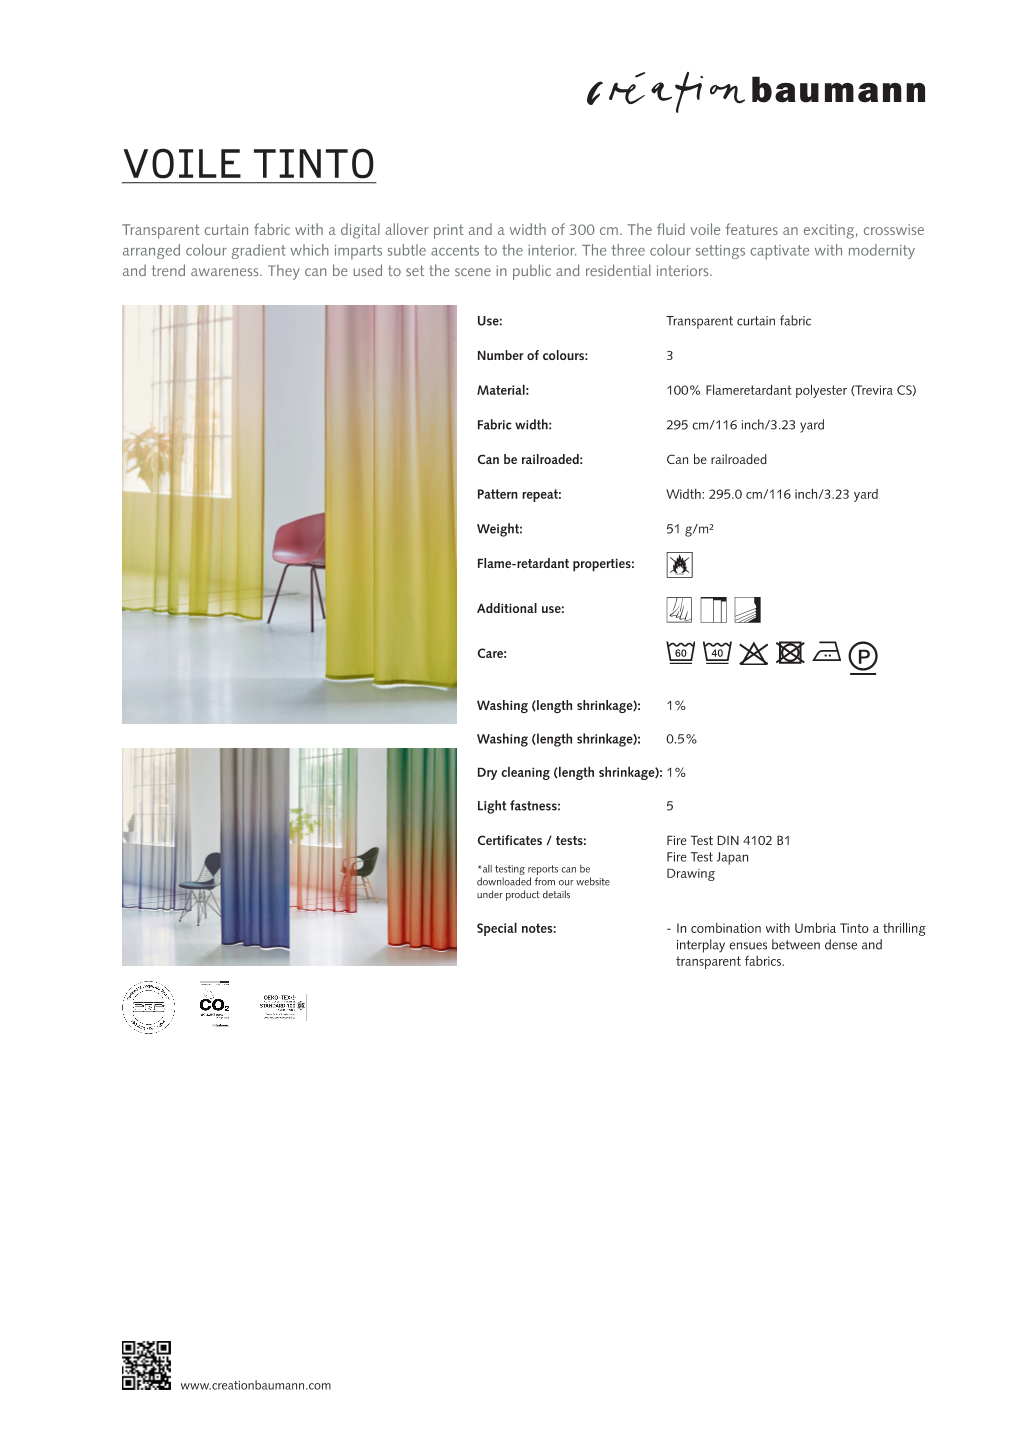 Article Data Sheet VOILE TINTO